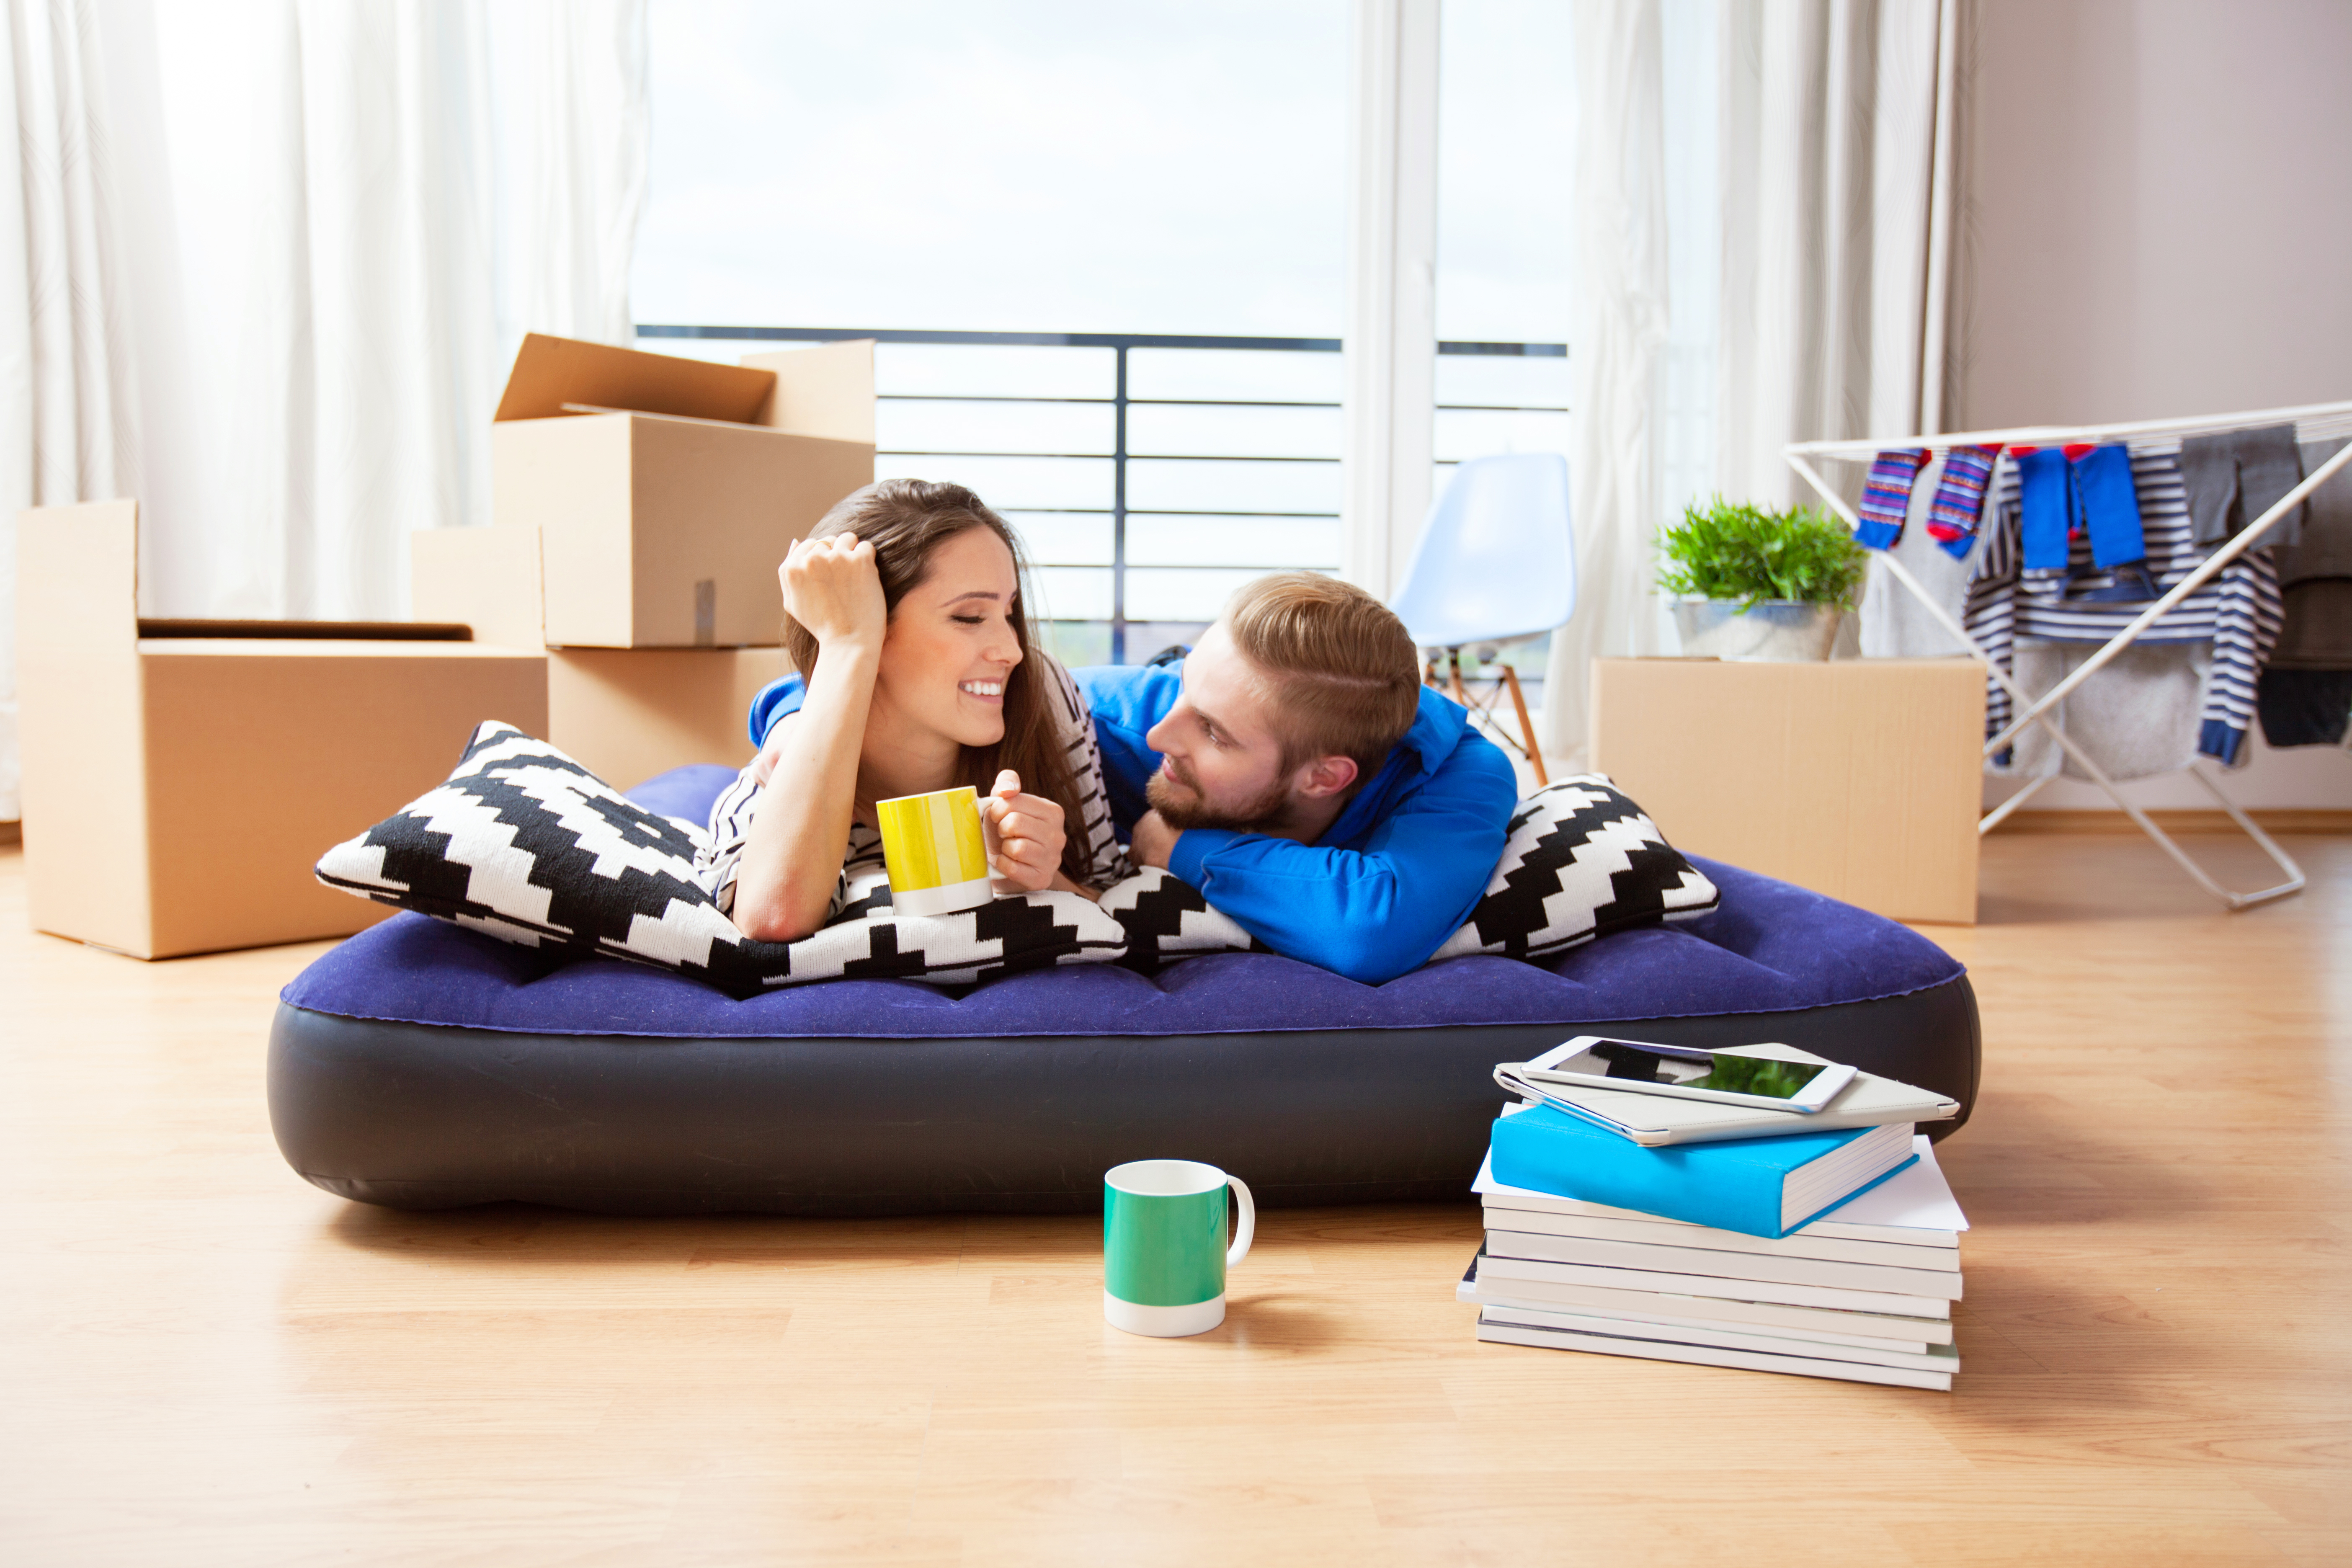 A young couple are relaxing on an inflatable mattress on the hard floor of a room with cardboard boxes on moving day.